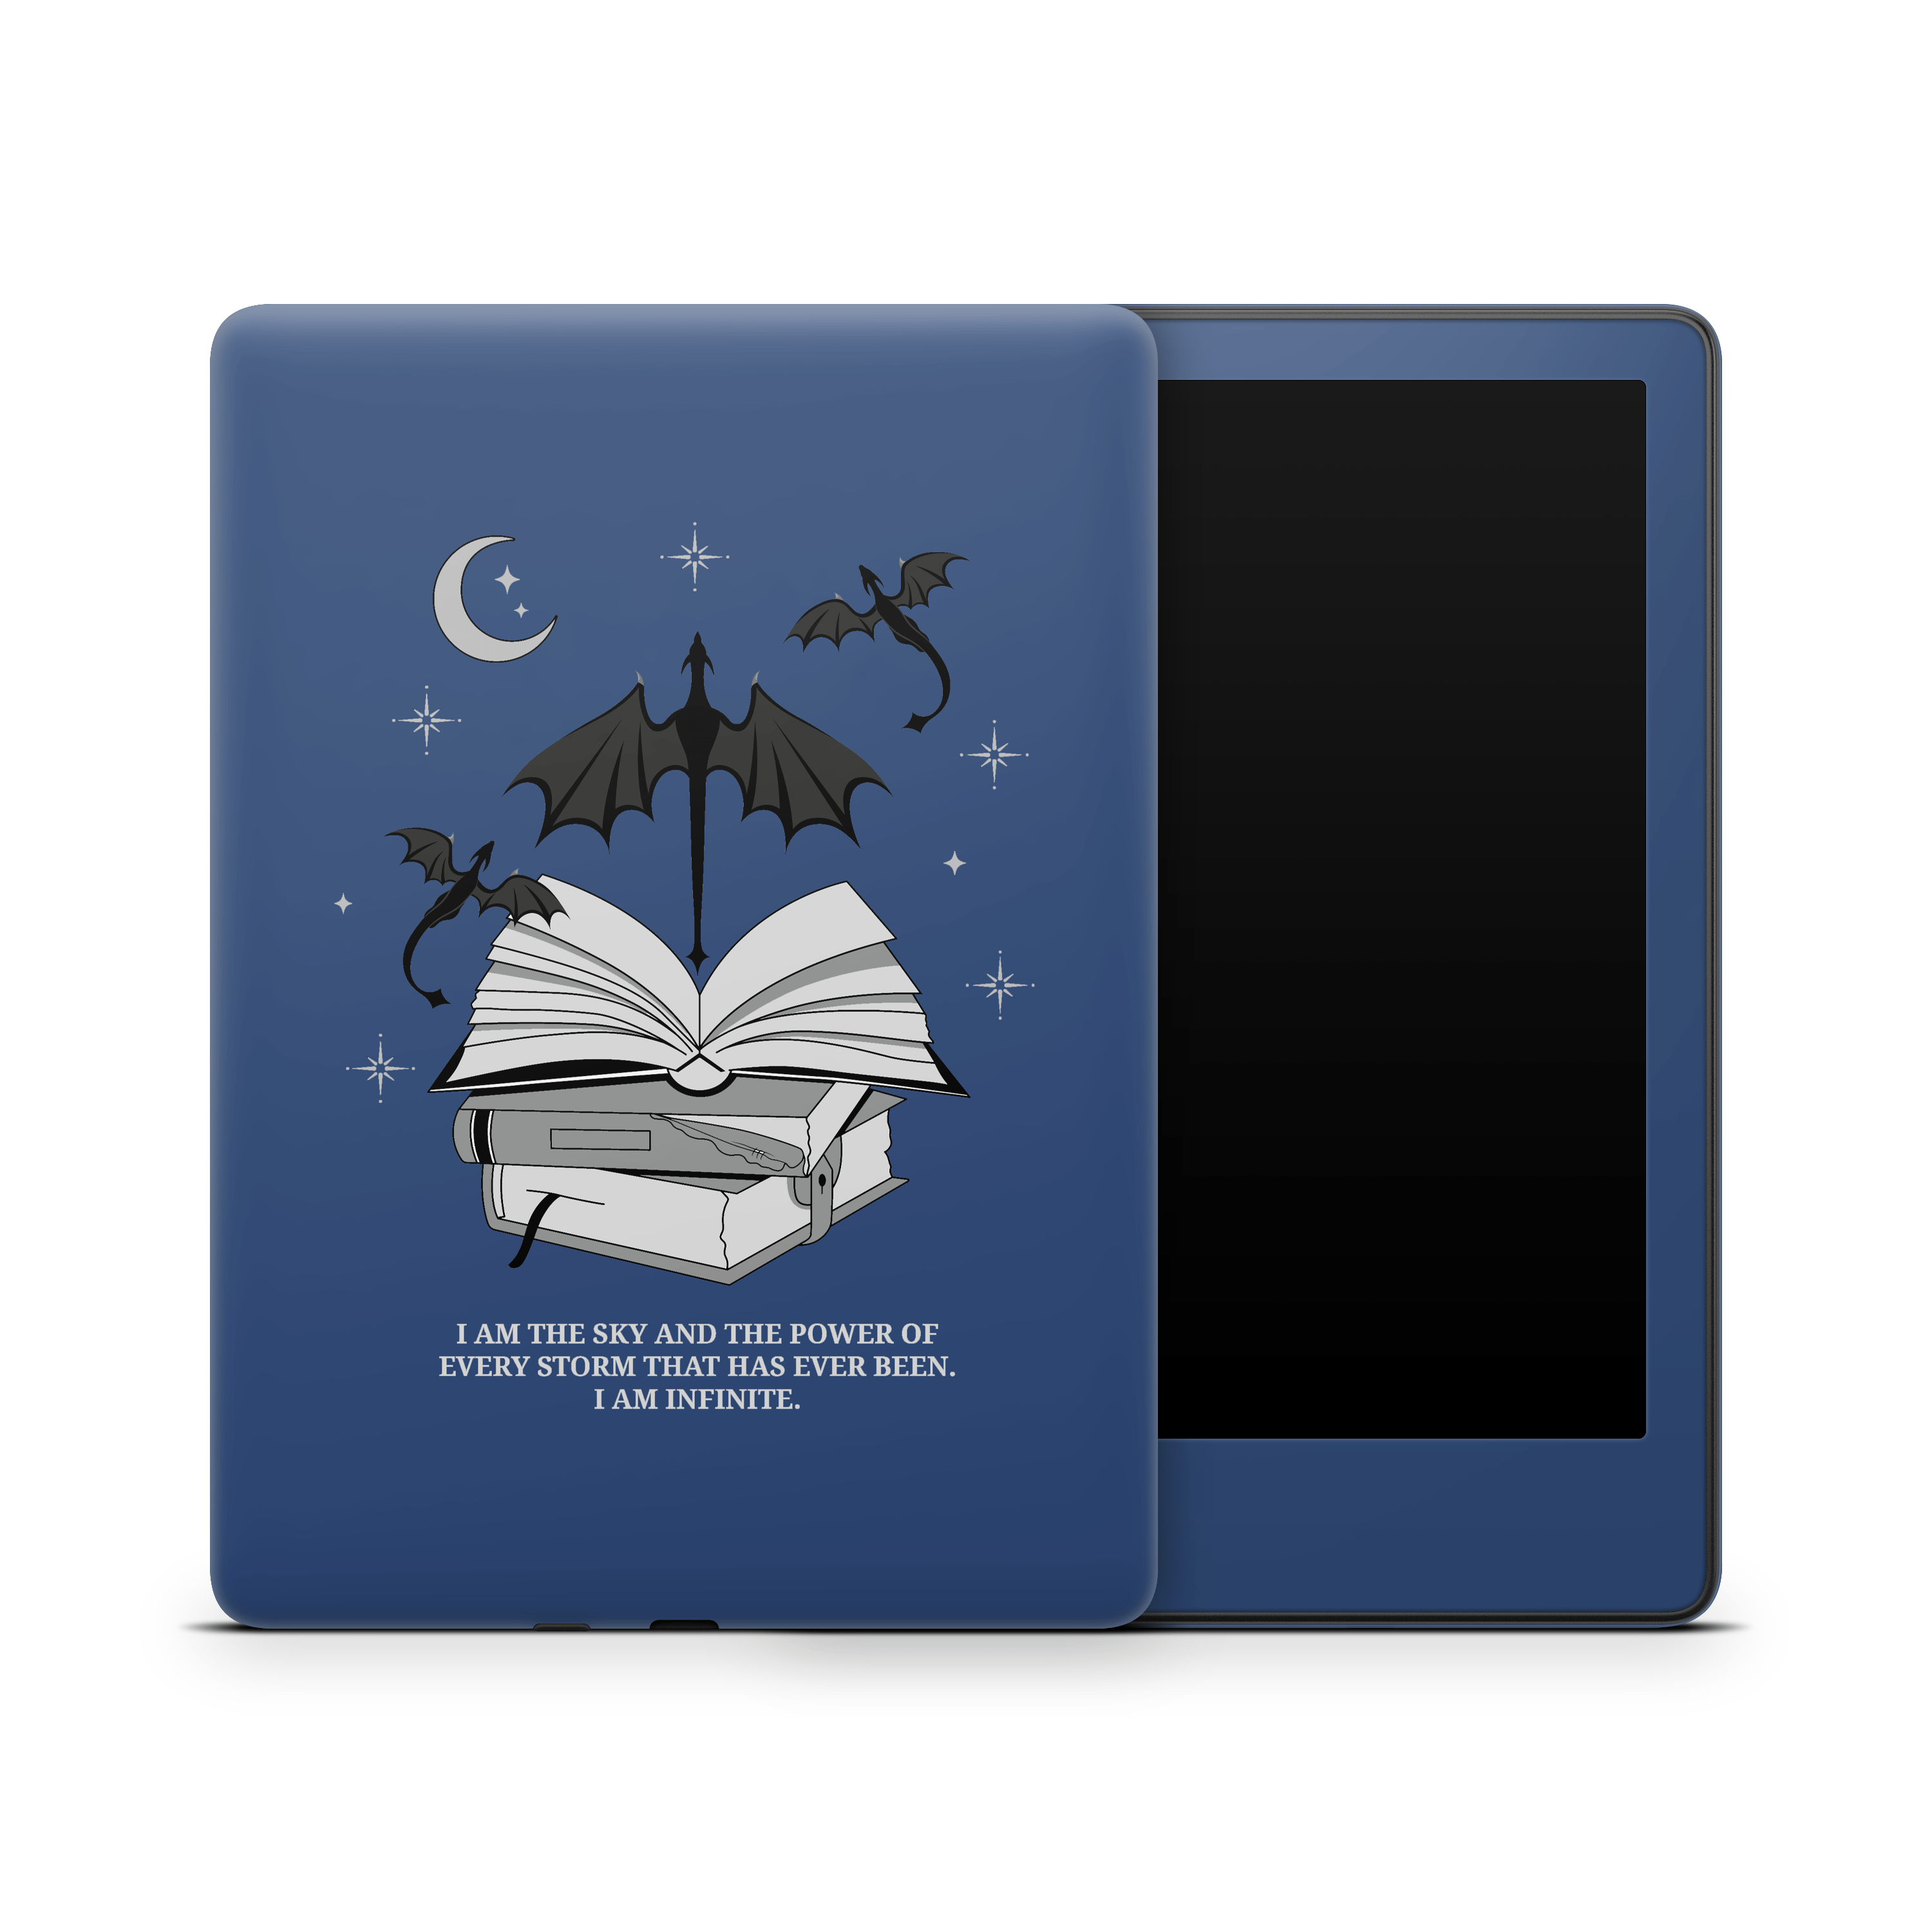 I Am Infinite (Navy) Kindle Skins | Fourth Wing Officially Licensed